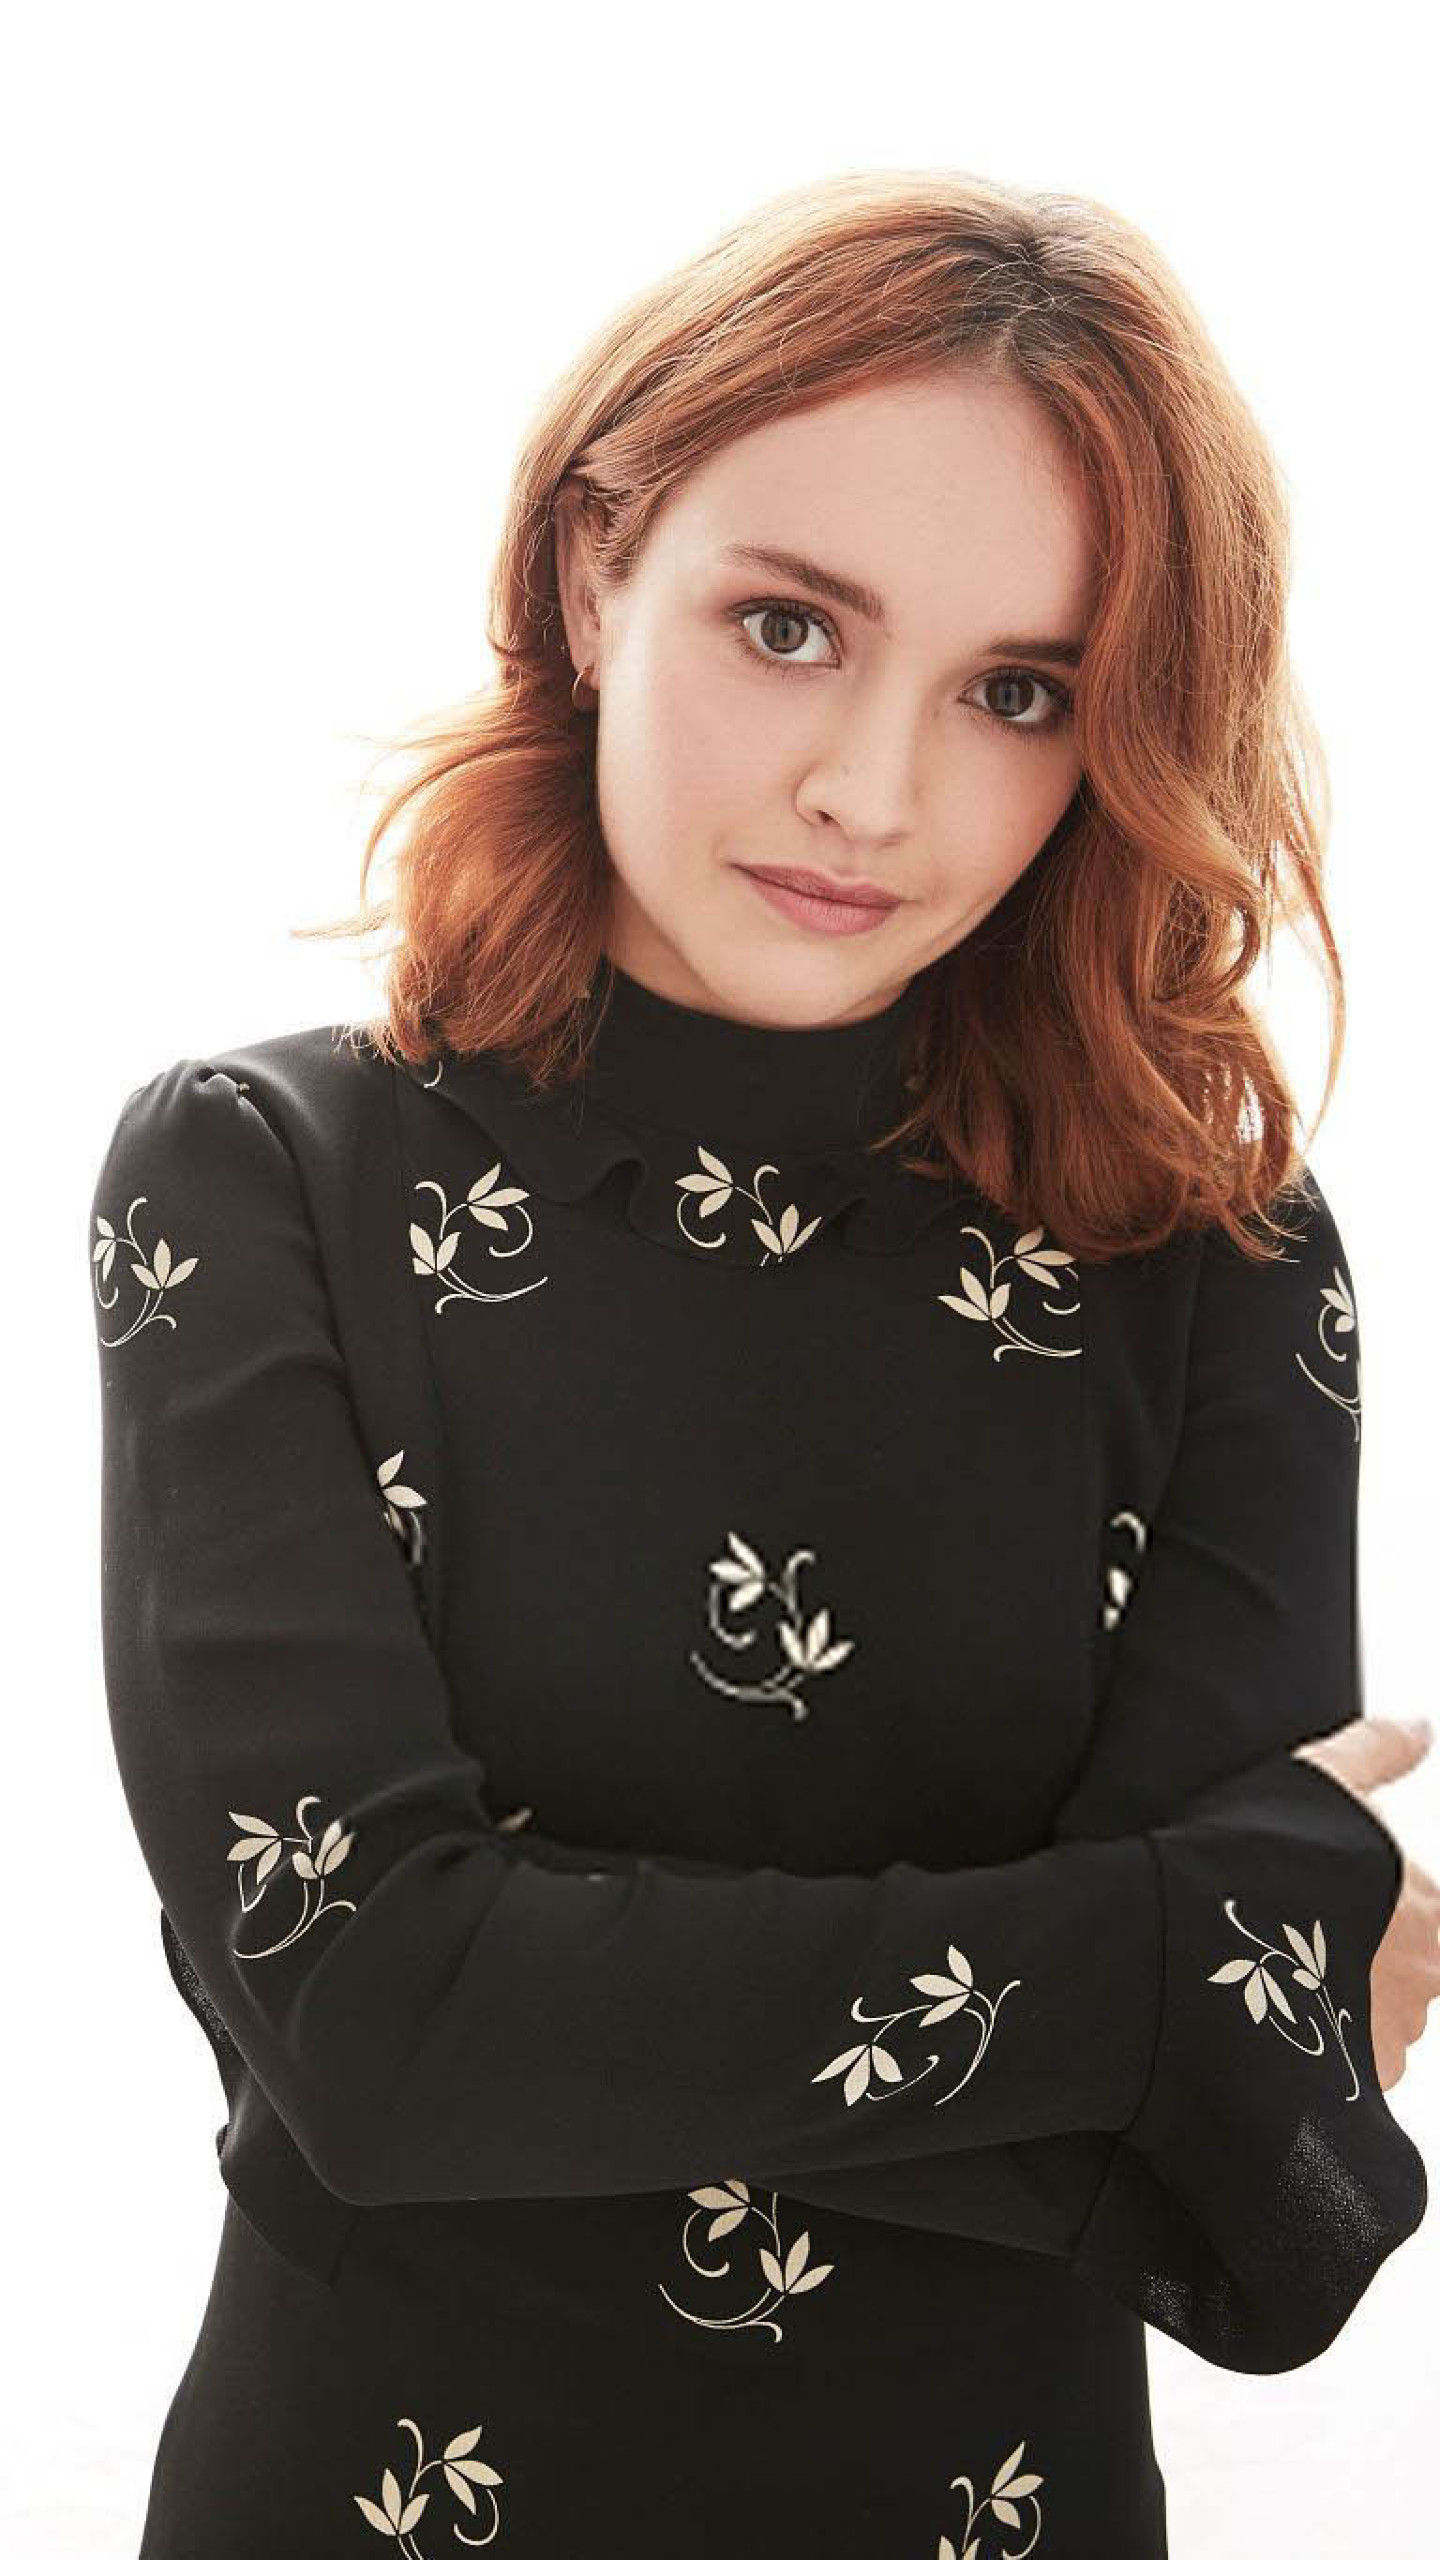 Olivia Cooke Wallpapers